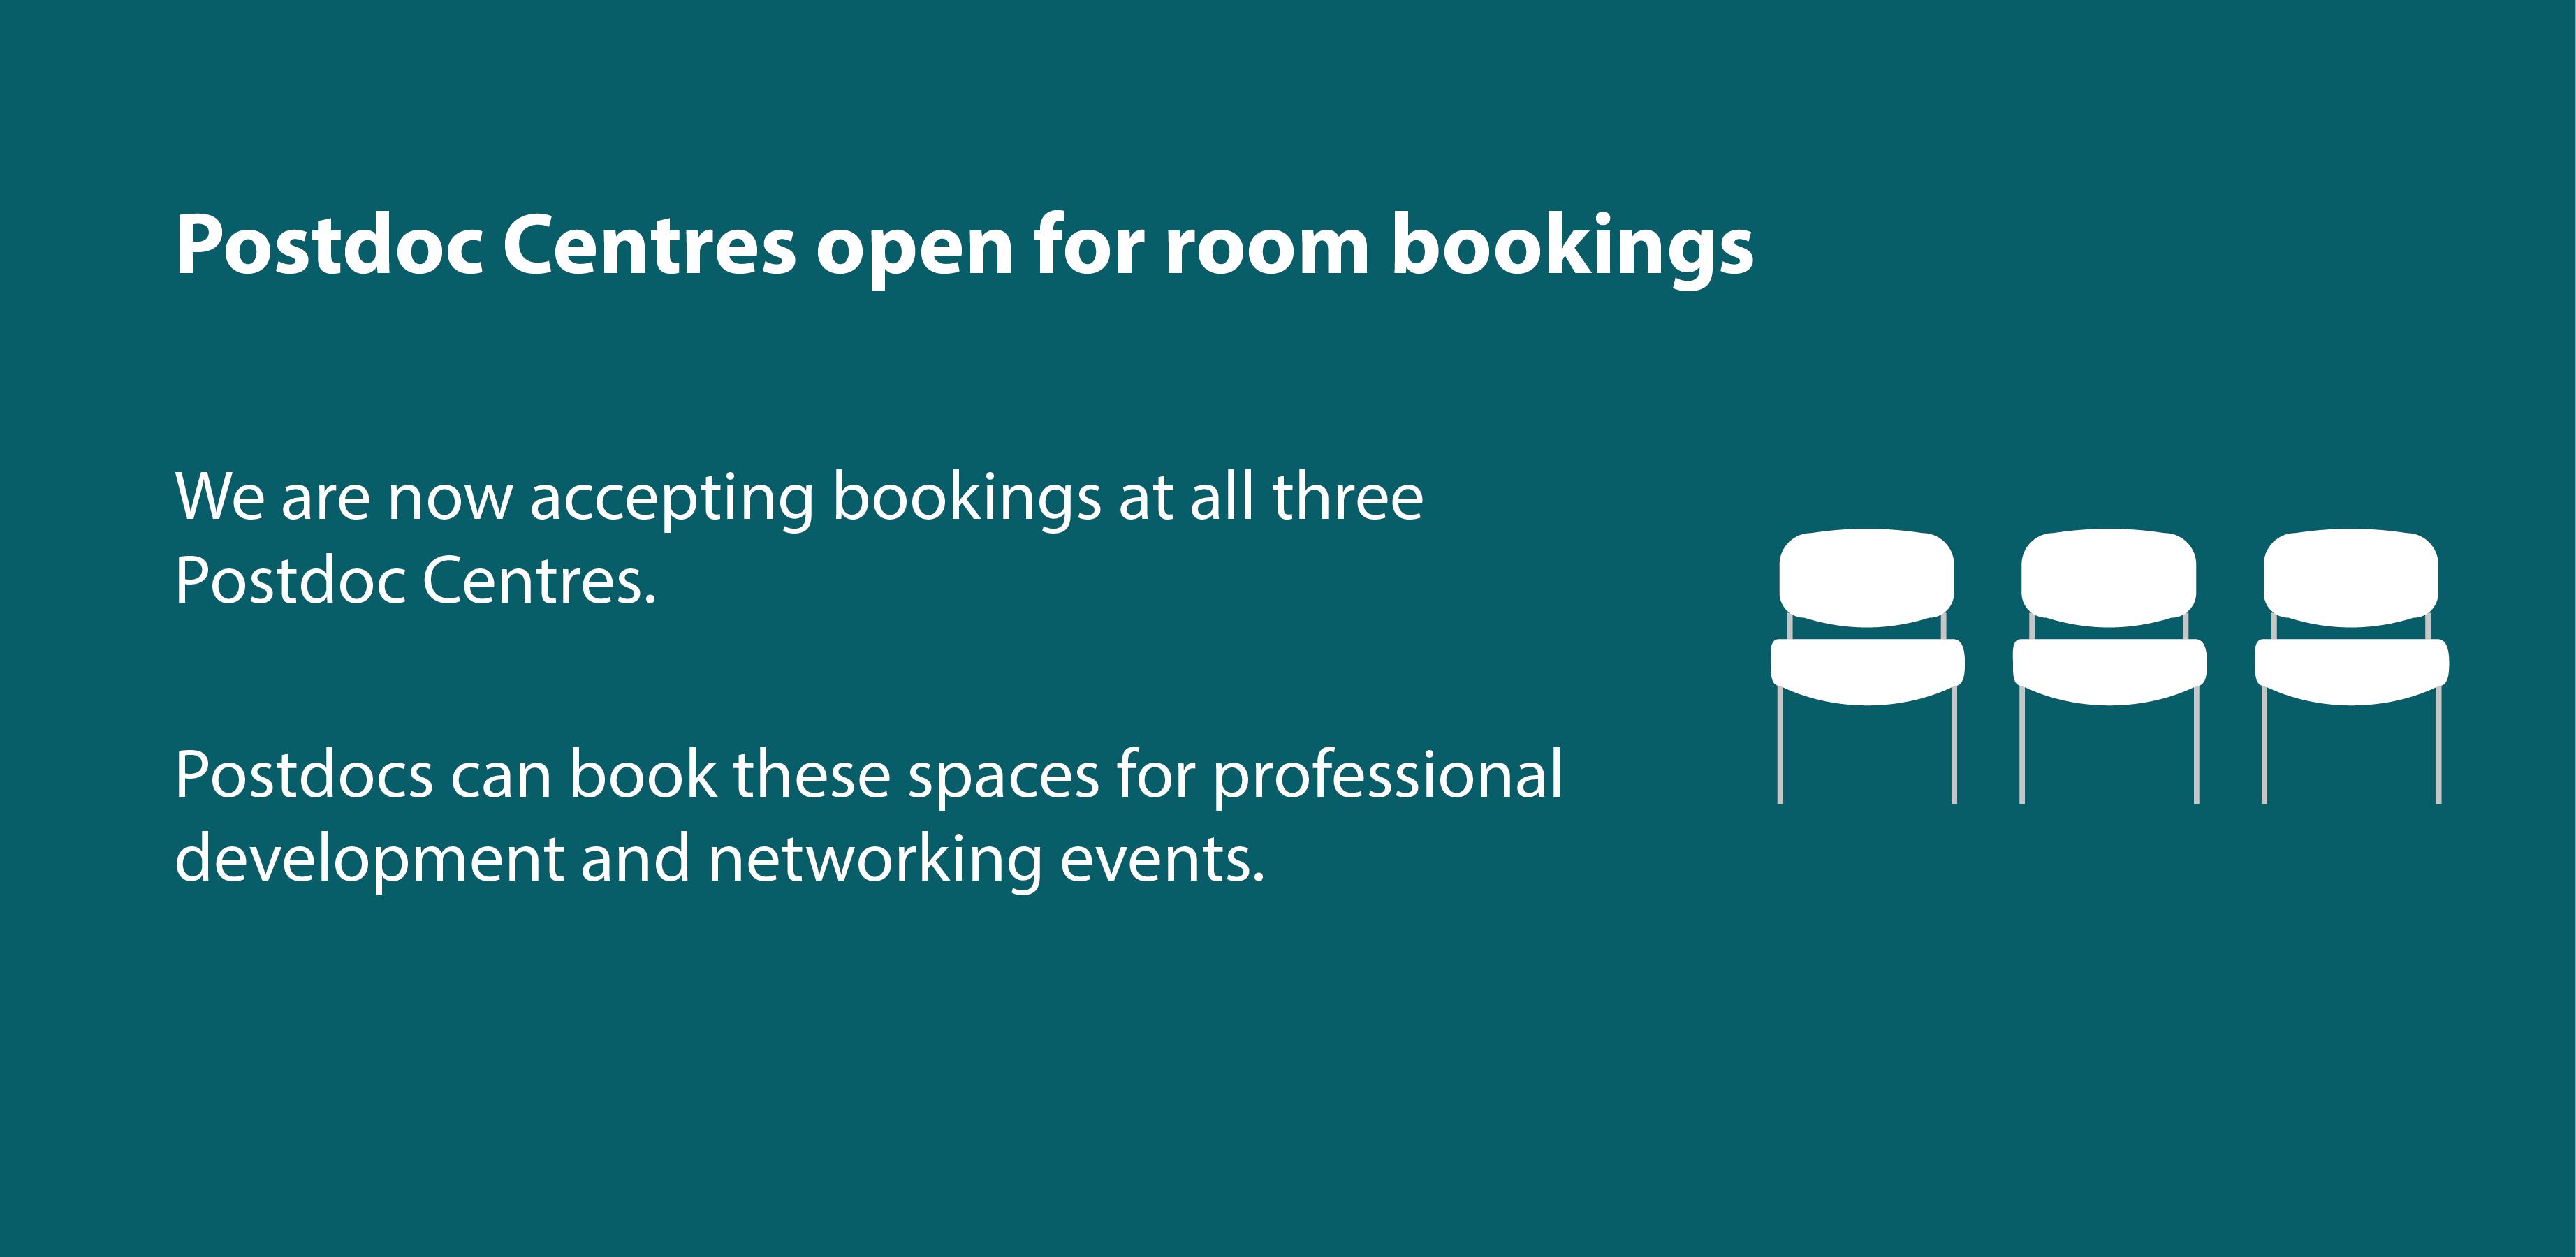 We are now accepting bookings at all three Postdoc Centres. Postdocs can book these spaces for professional development and networking events.